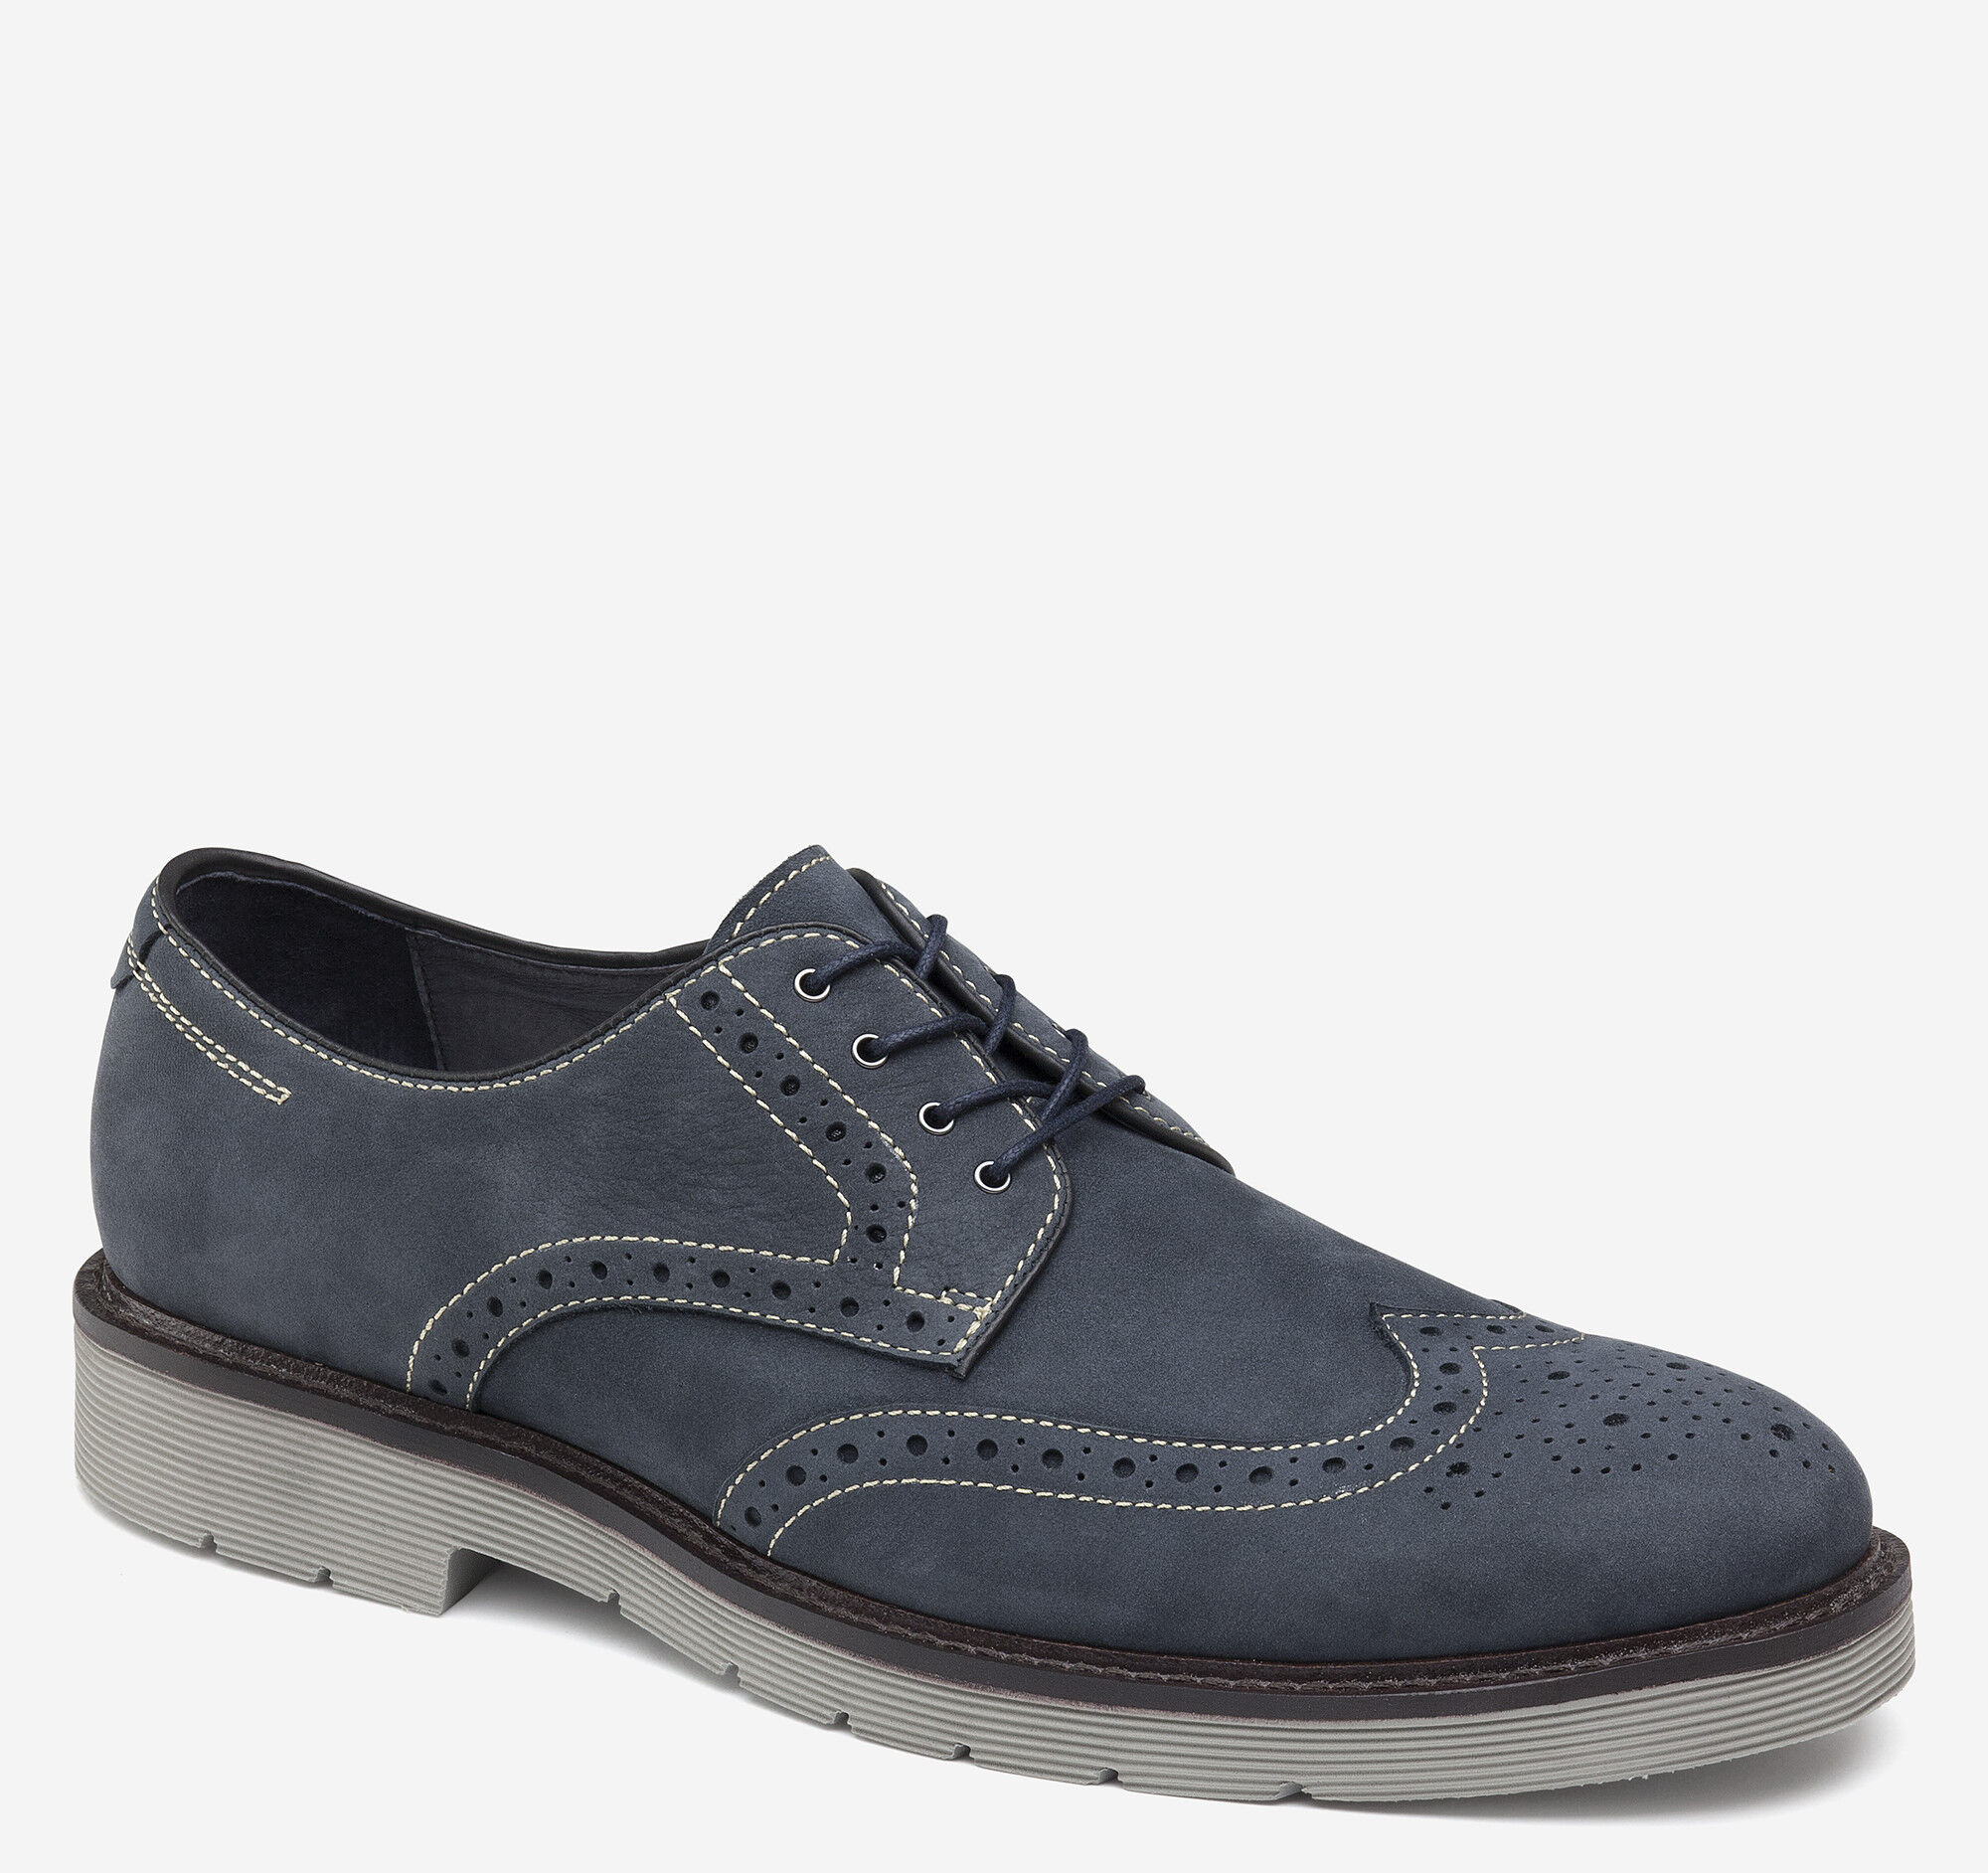 kinley casual slip on oxford